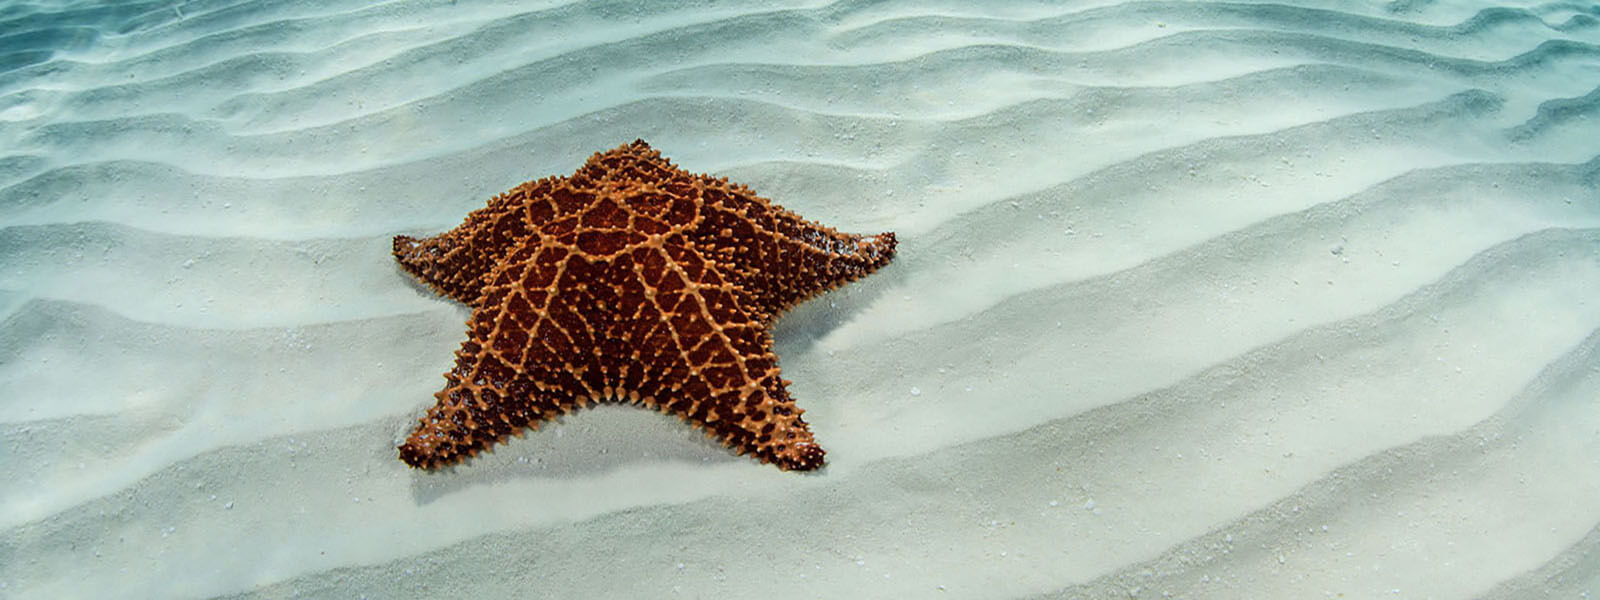 Red seastars are common on our Belize snorkeling tour